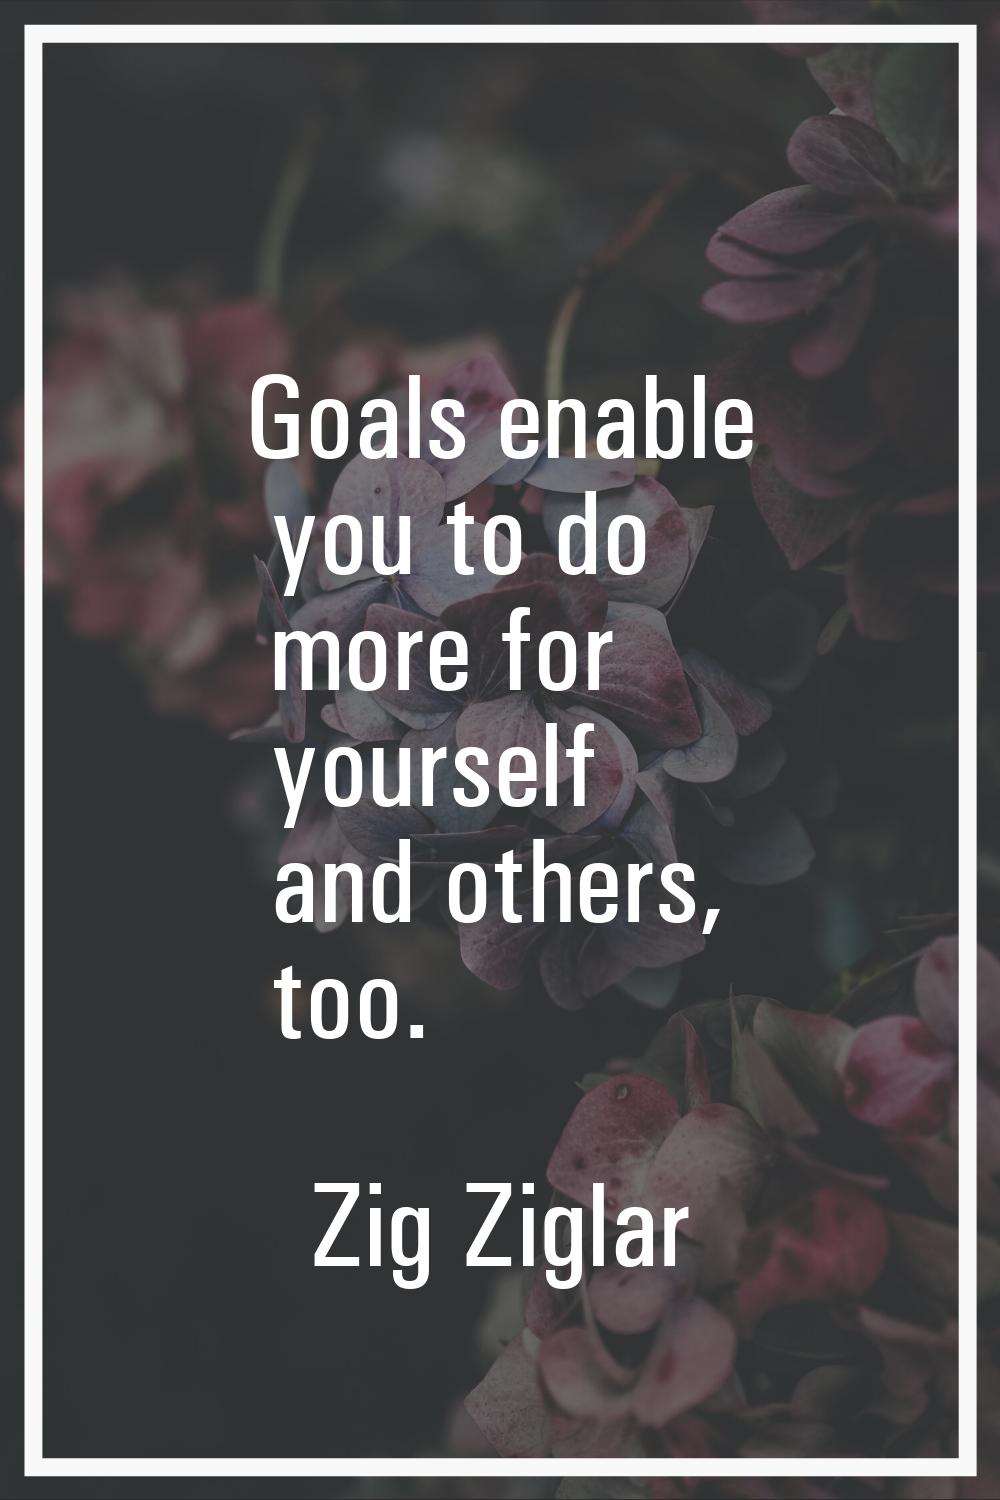 Goals enable you to do more for yourself and others, too.